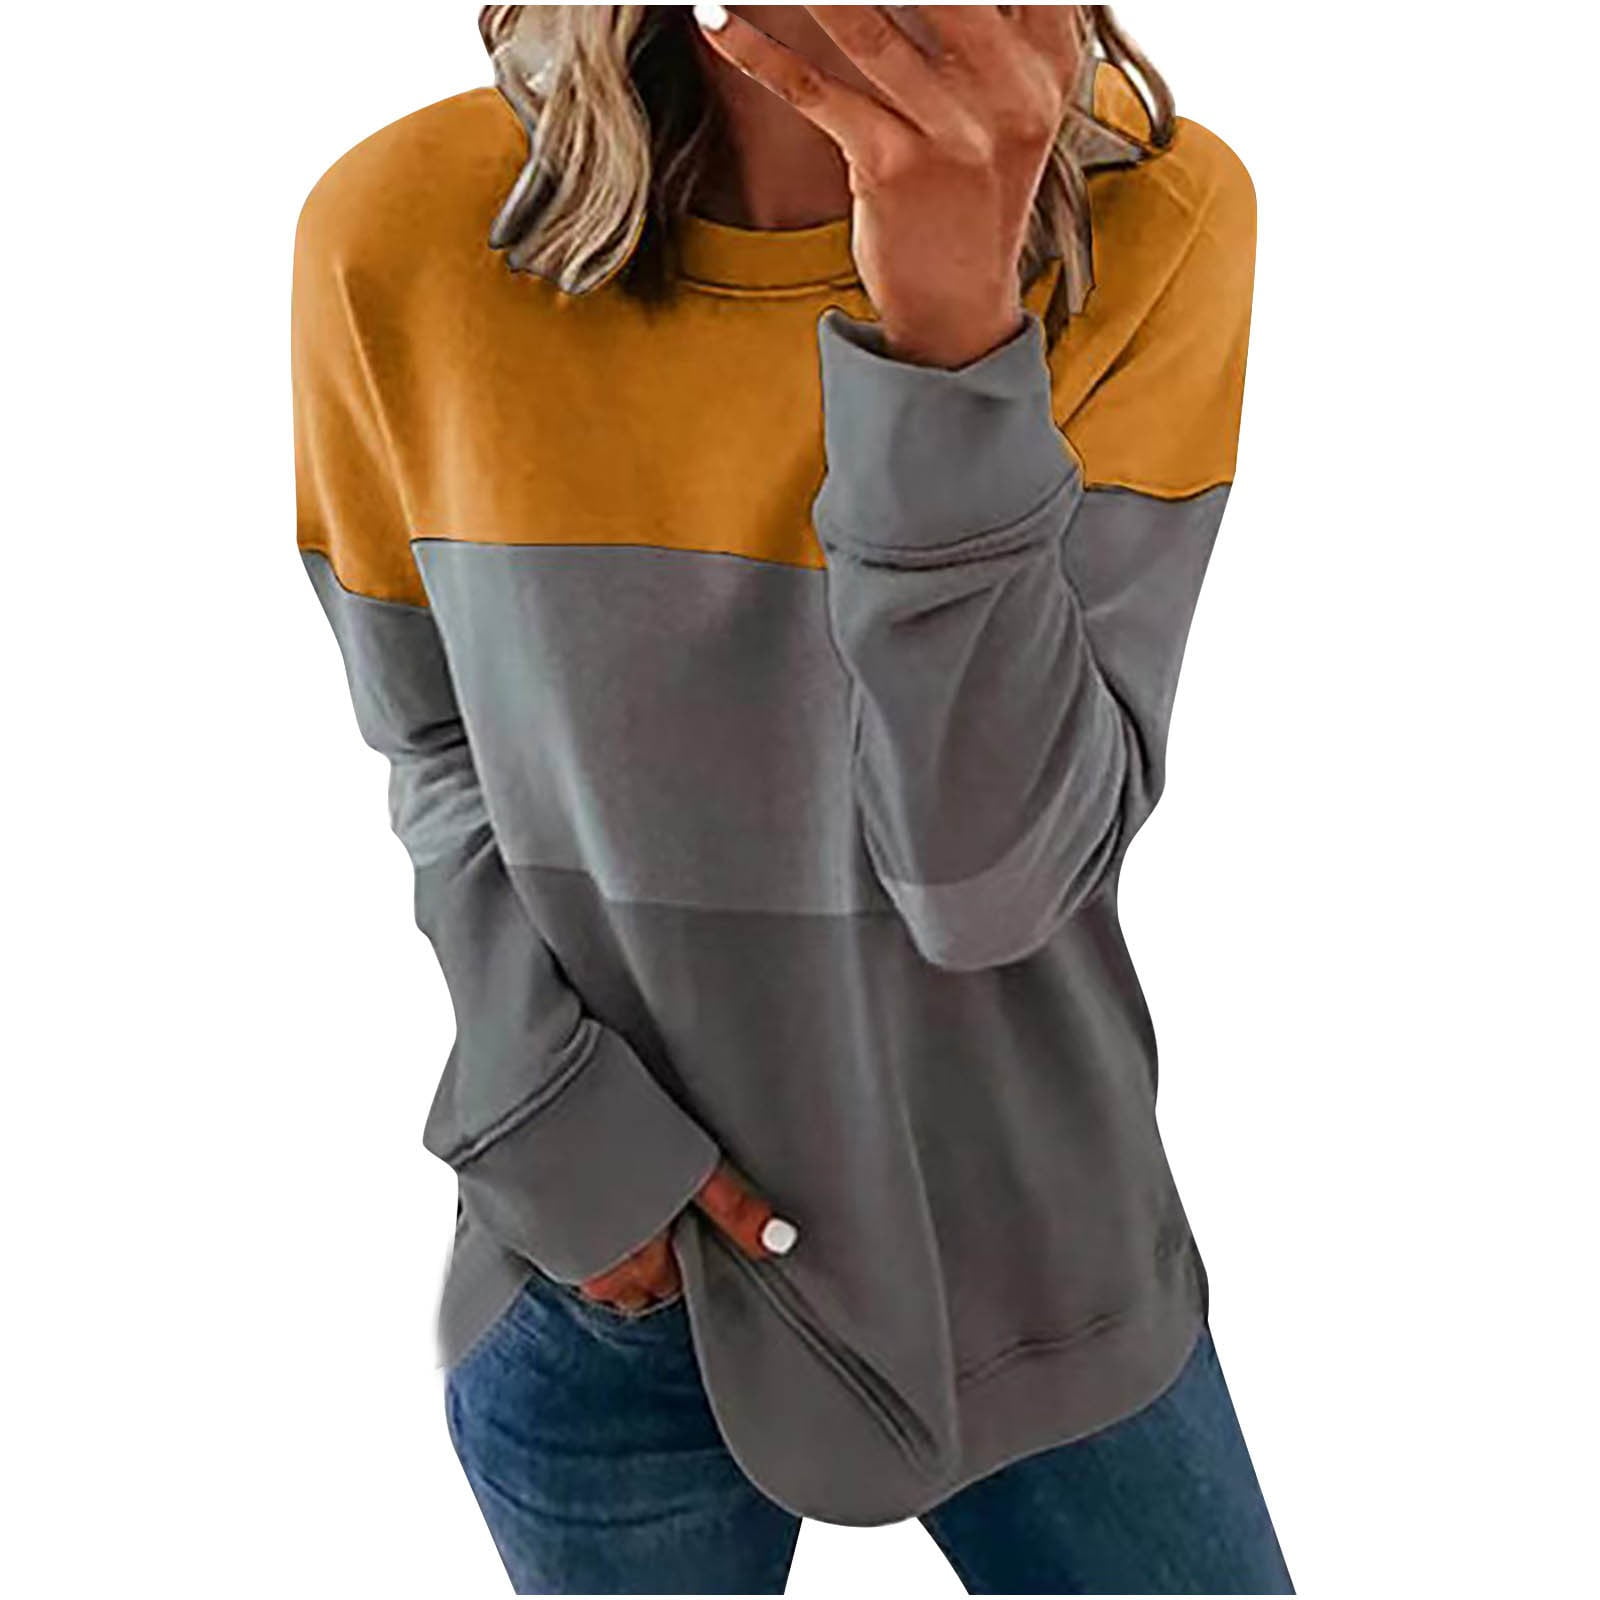 YYDGH Womens Causal Loose Crewneck Sweatshirt Plus Size Long Sleeve Striped  Pullover Tops Loose Color Block Side Slit Winter Clothes(Gray,4XL) 